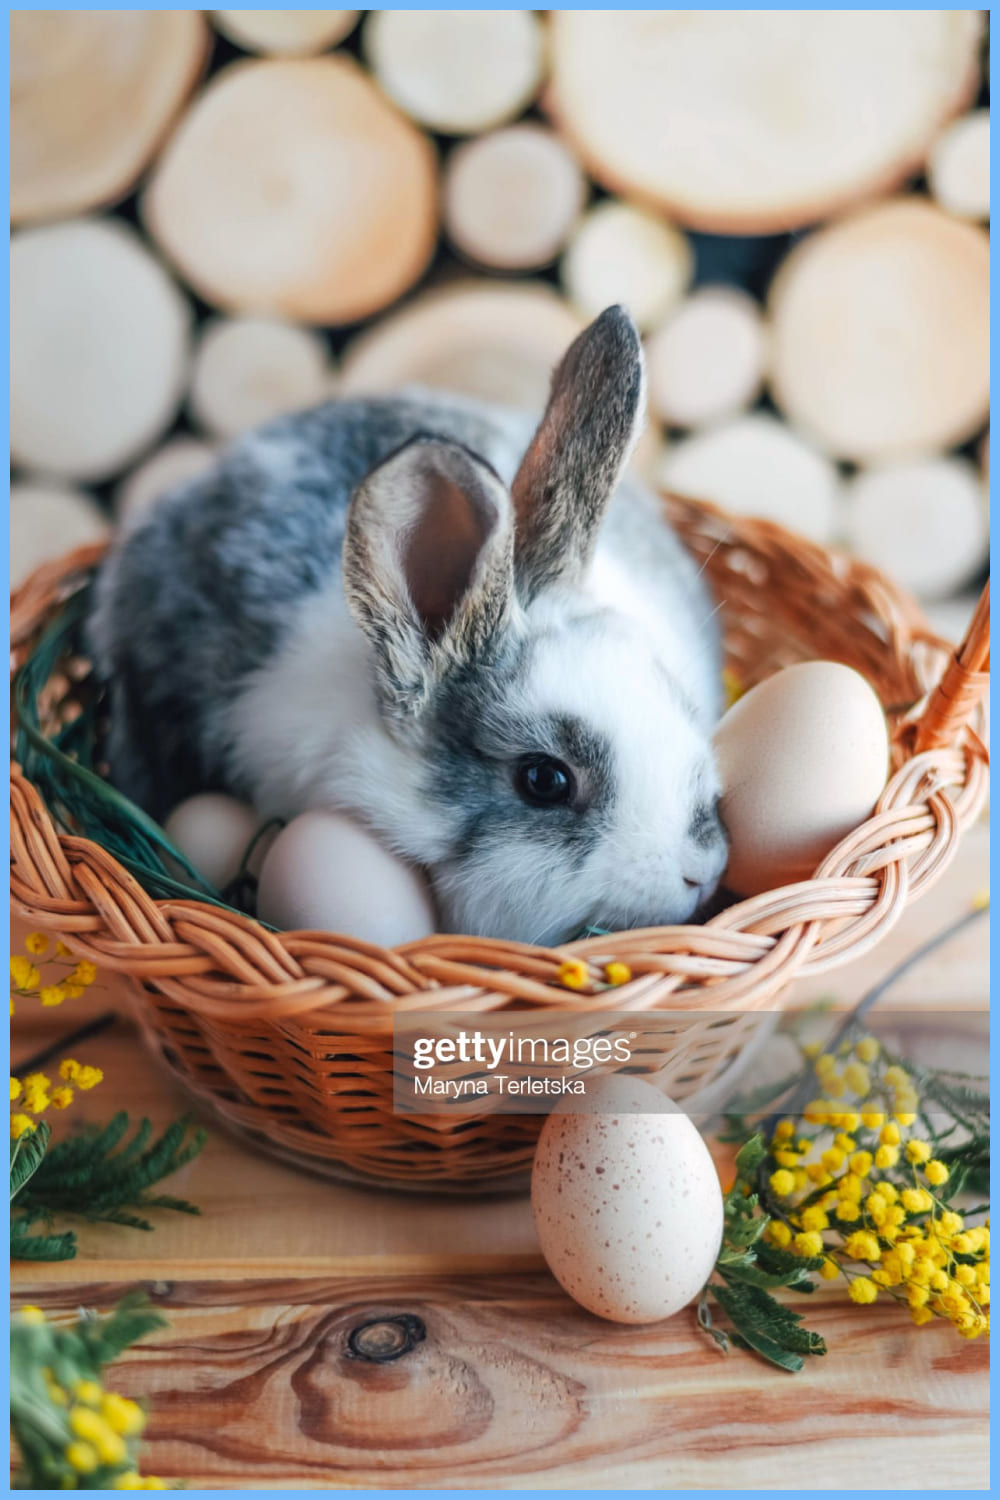 Gray and white rabbit in a basket on a wooden background.